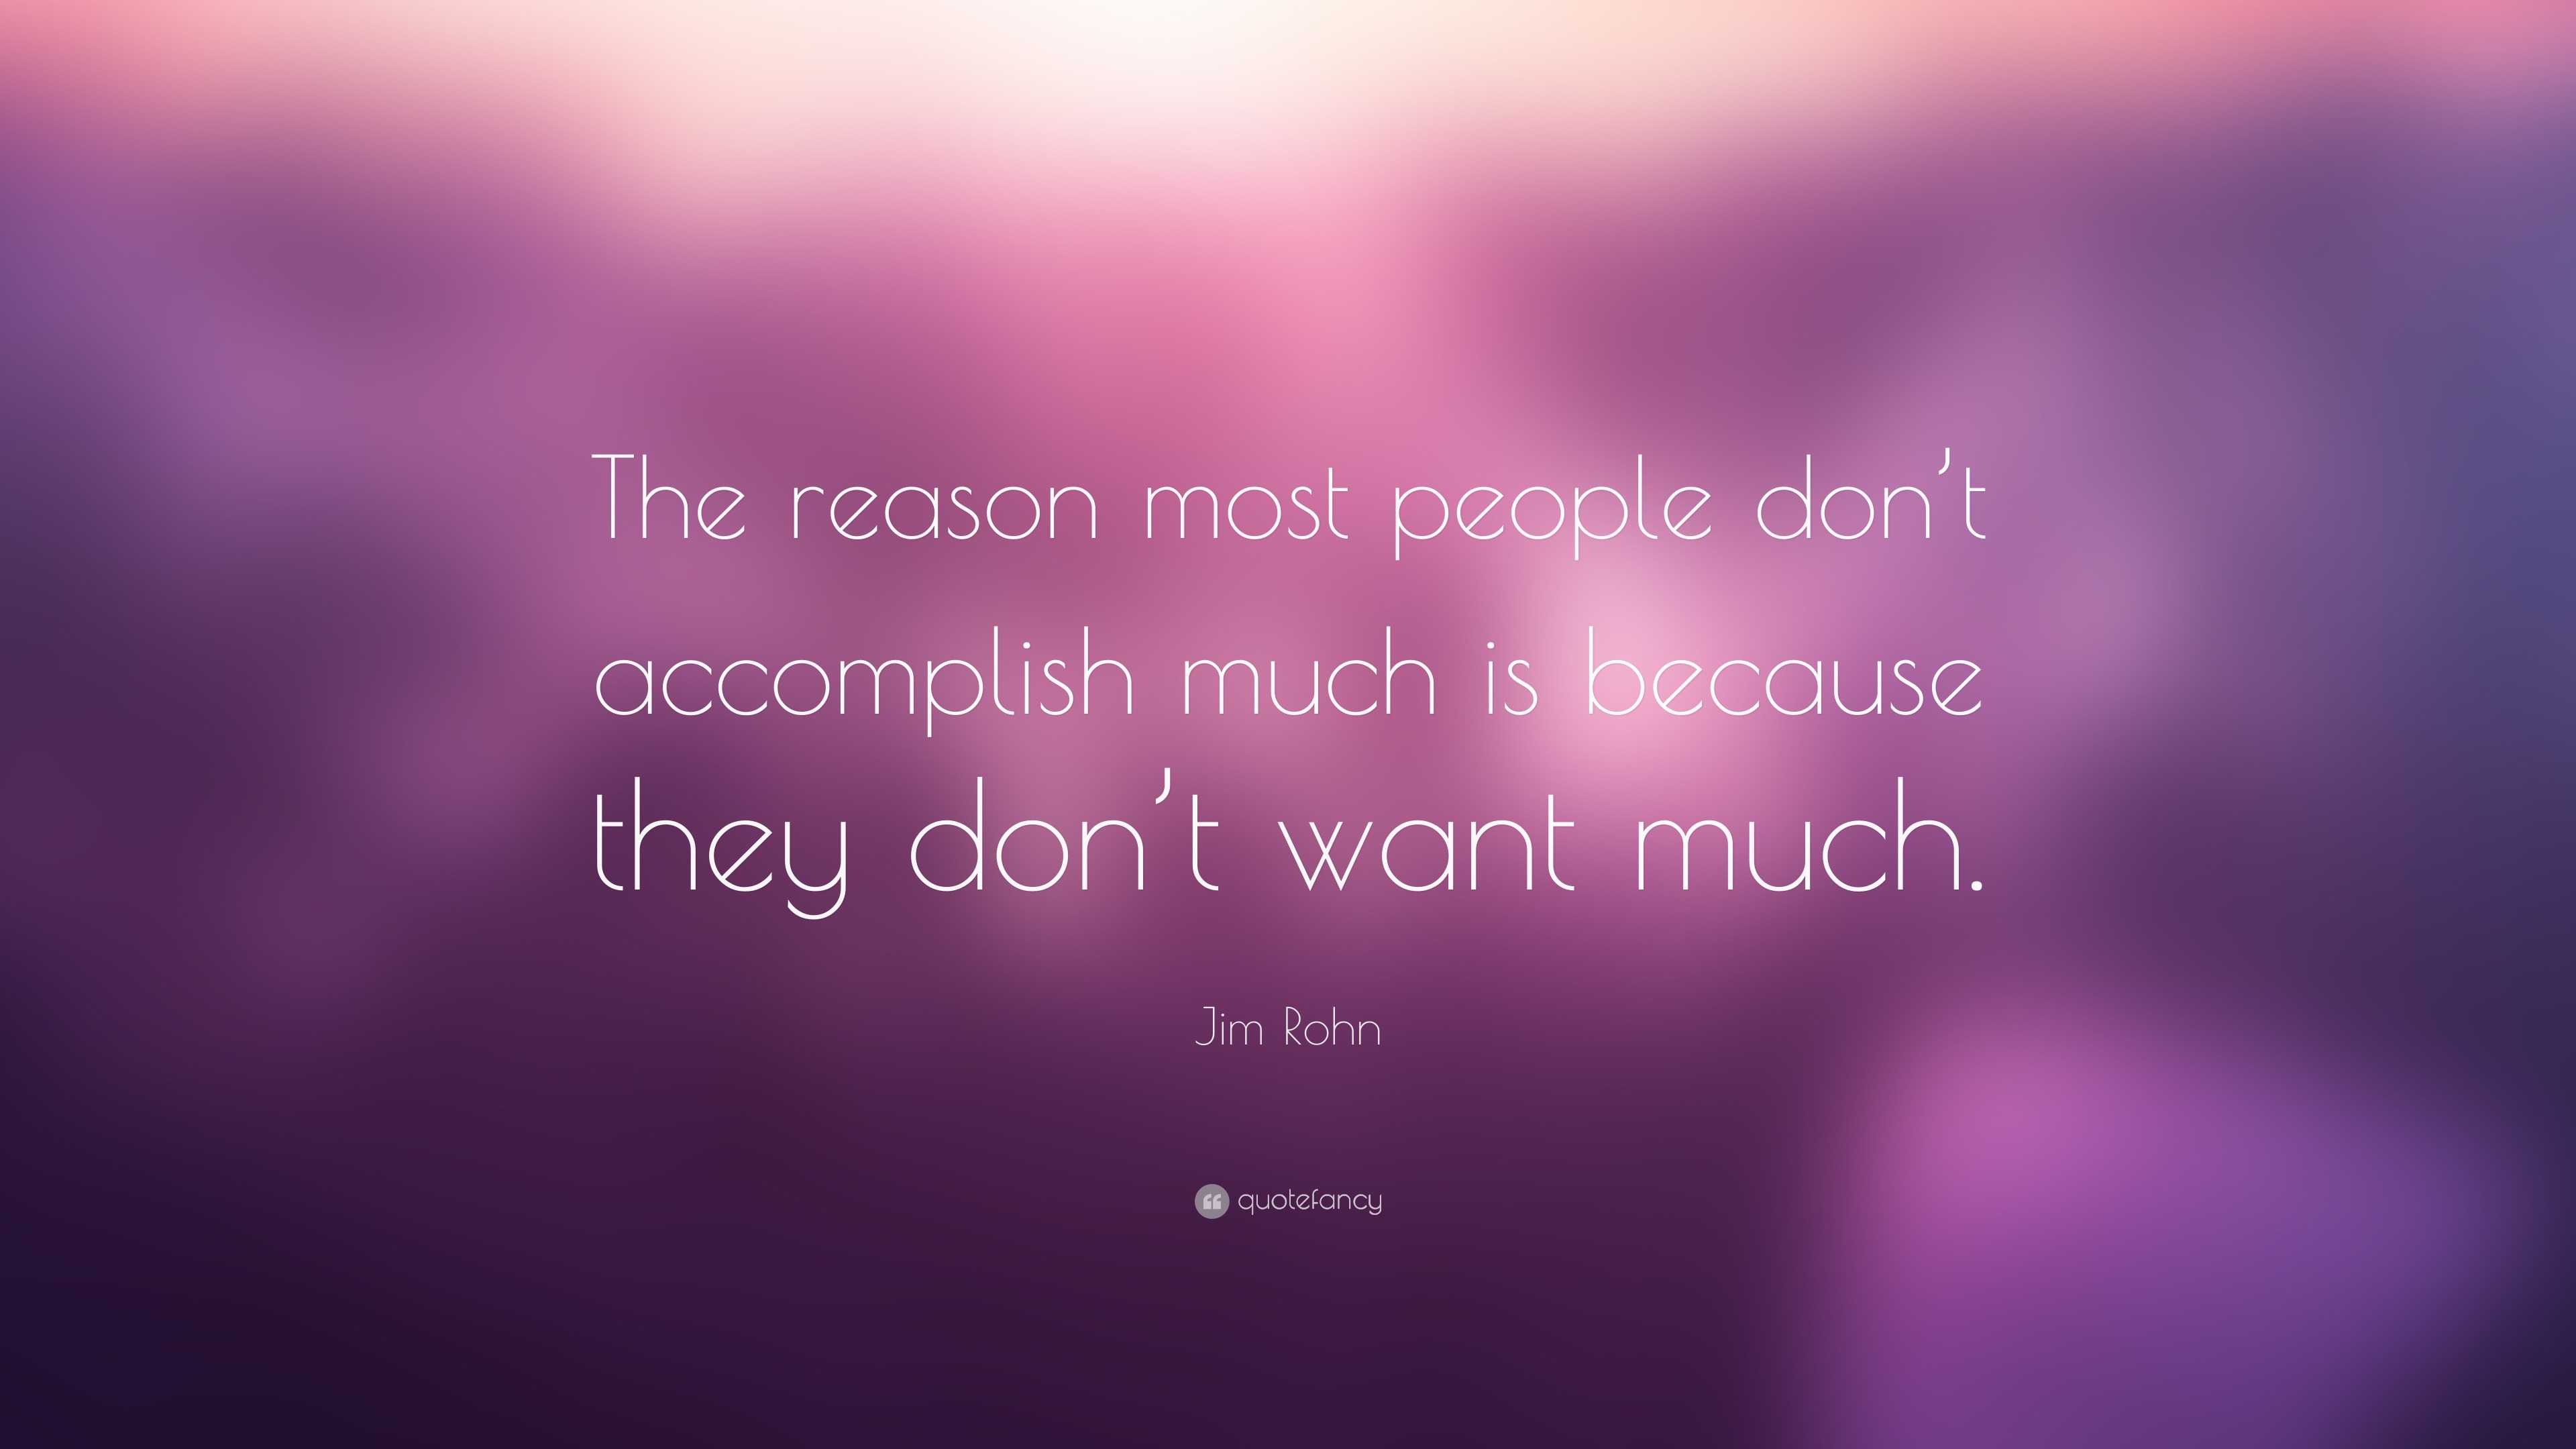 Jim Rohn Quote: “The reason most people don’t accomplish much is ...